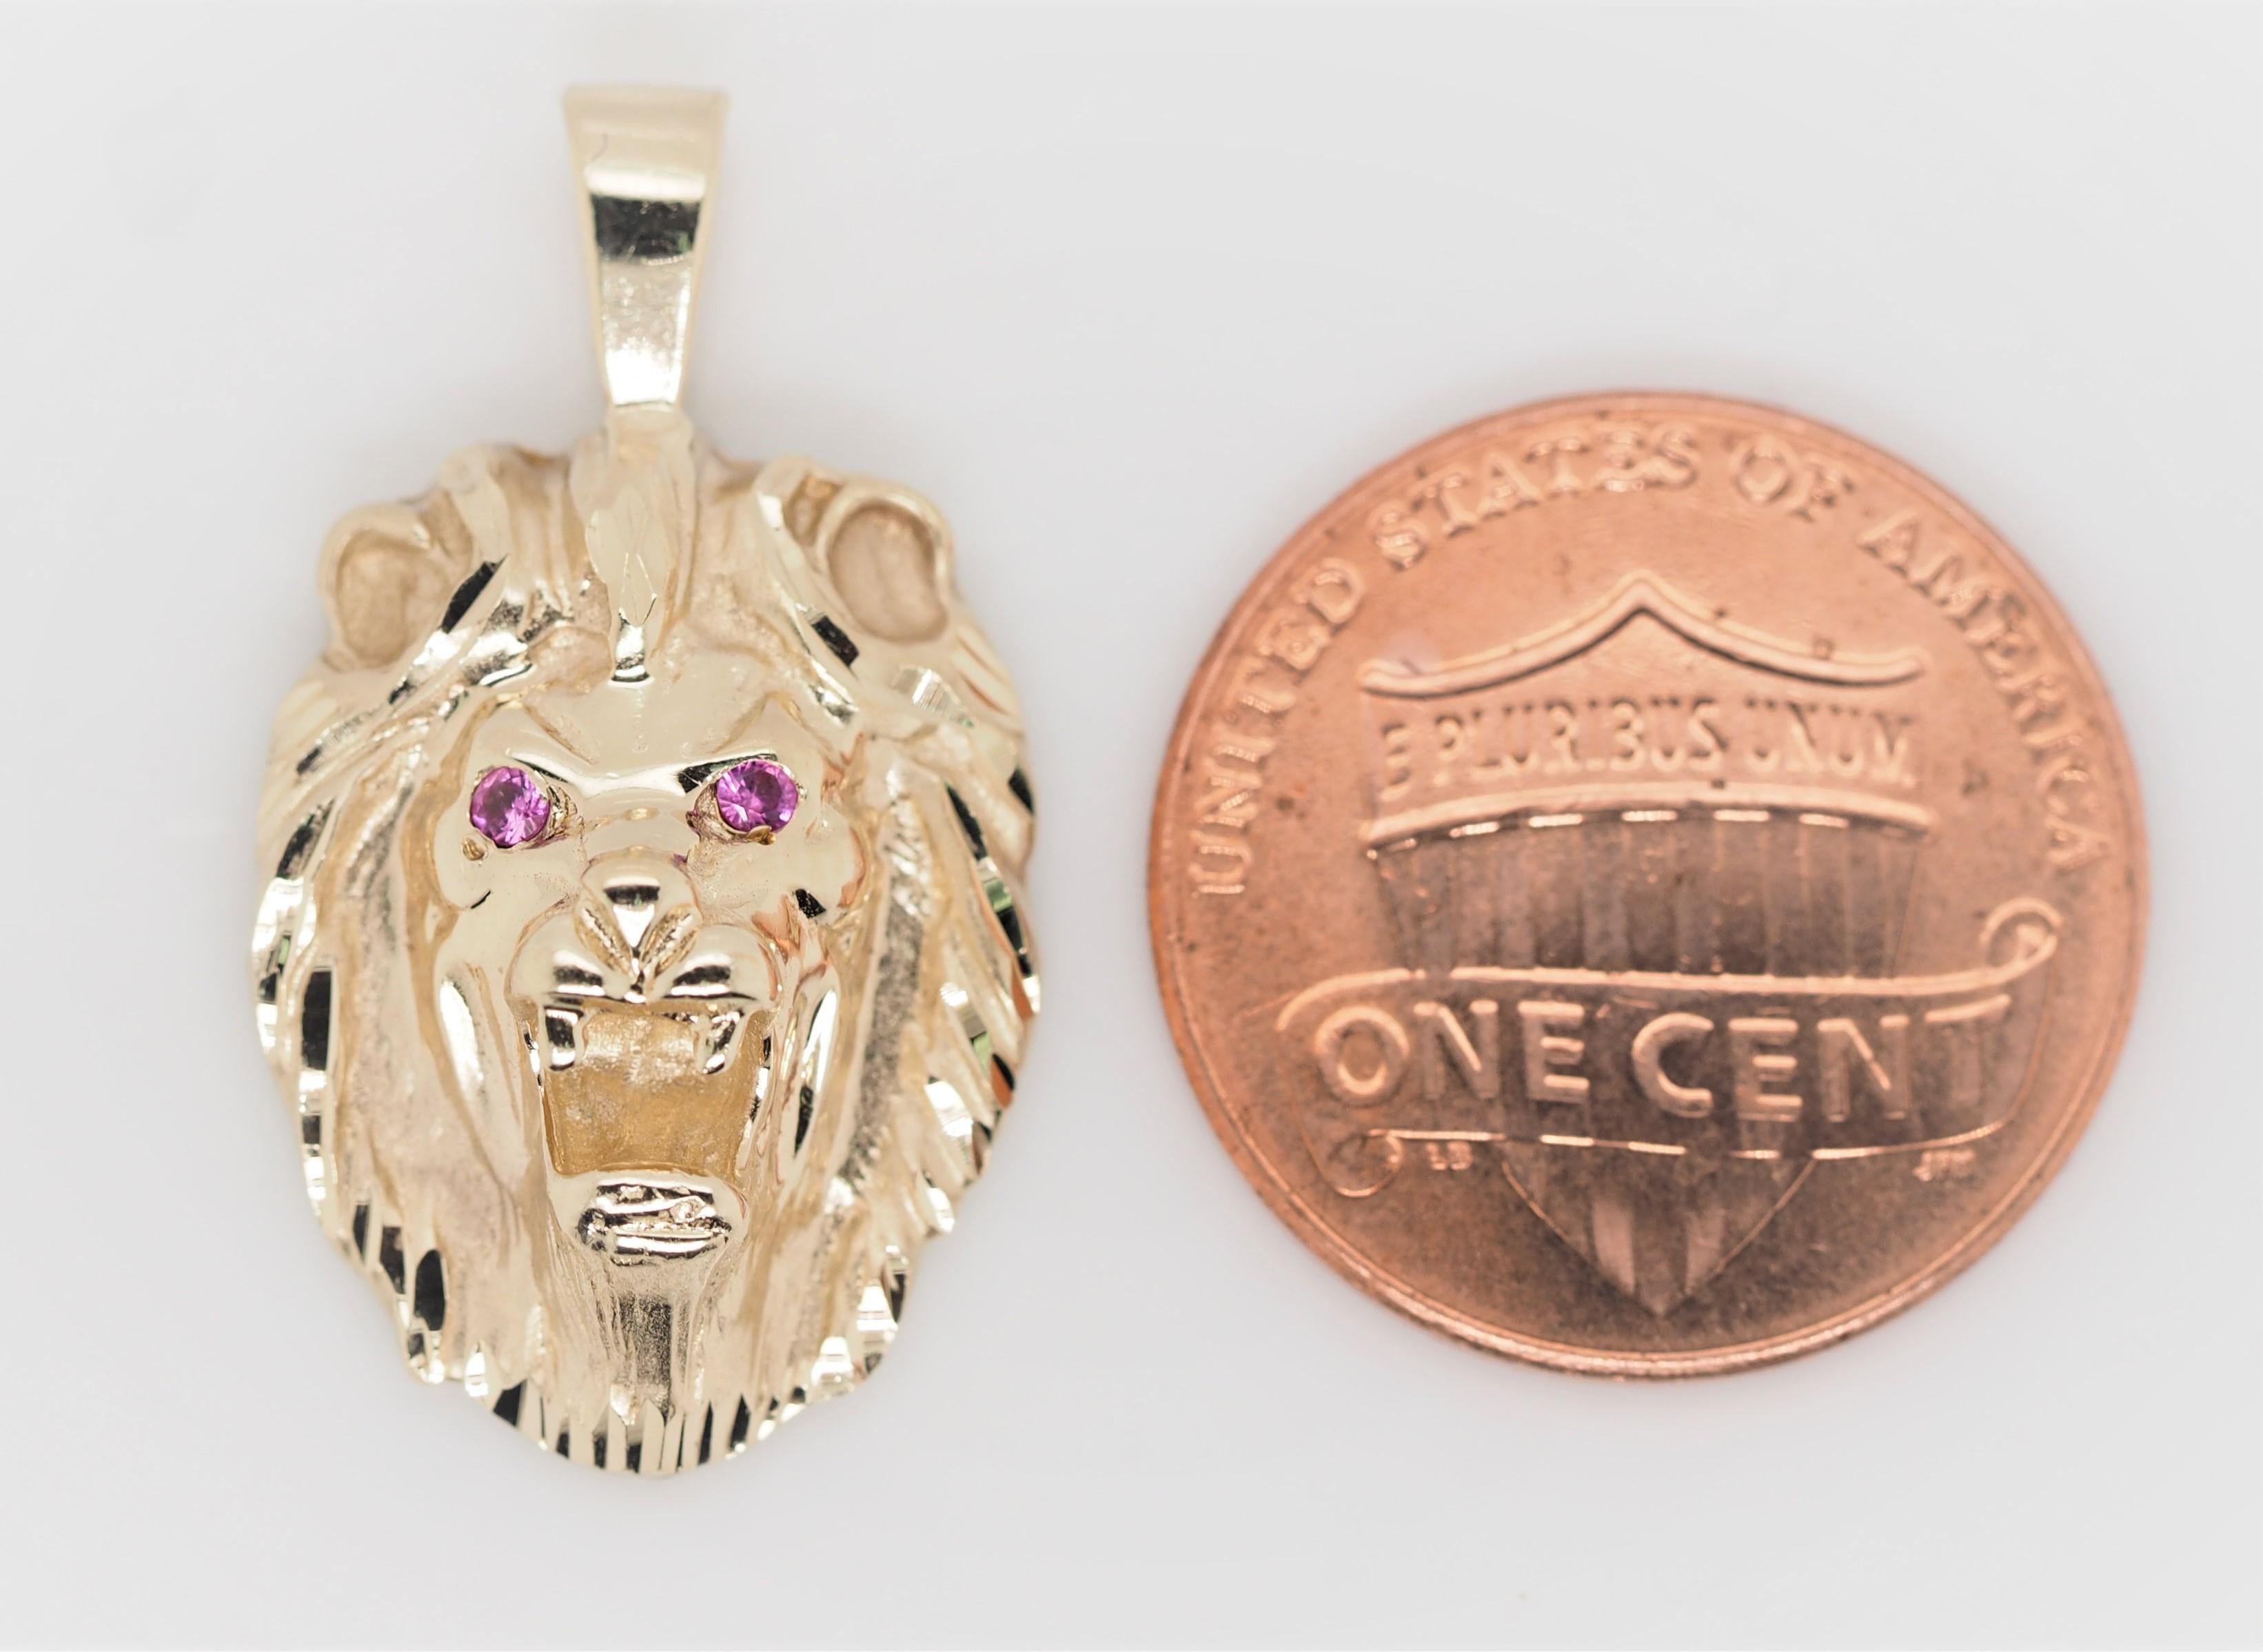 Crafted of solid 14K yellow gold, this beautiful lion charm with two pink sapphires is truly one of a kind. The charm features beautiful engravings and details all over it, making this lion come to life. It's the perfect piece to add to your